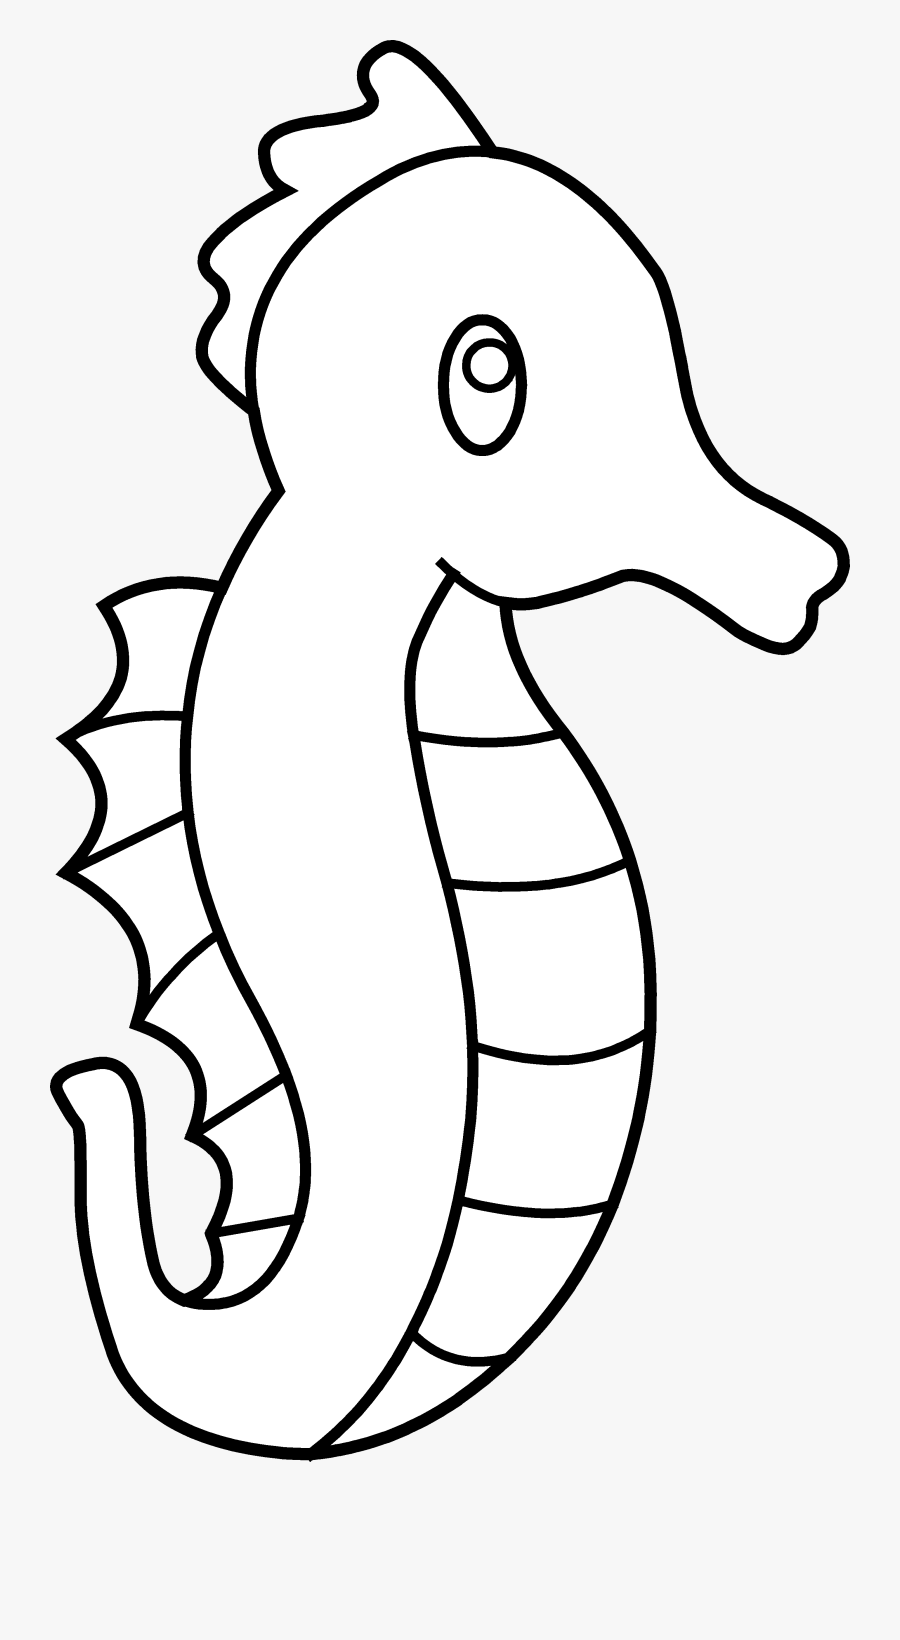 Seahorse Clip Art Black And White - Sea Horse Easy Drawing, Transparent Clipart